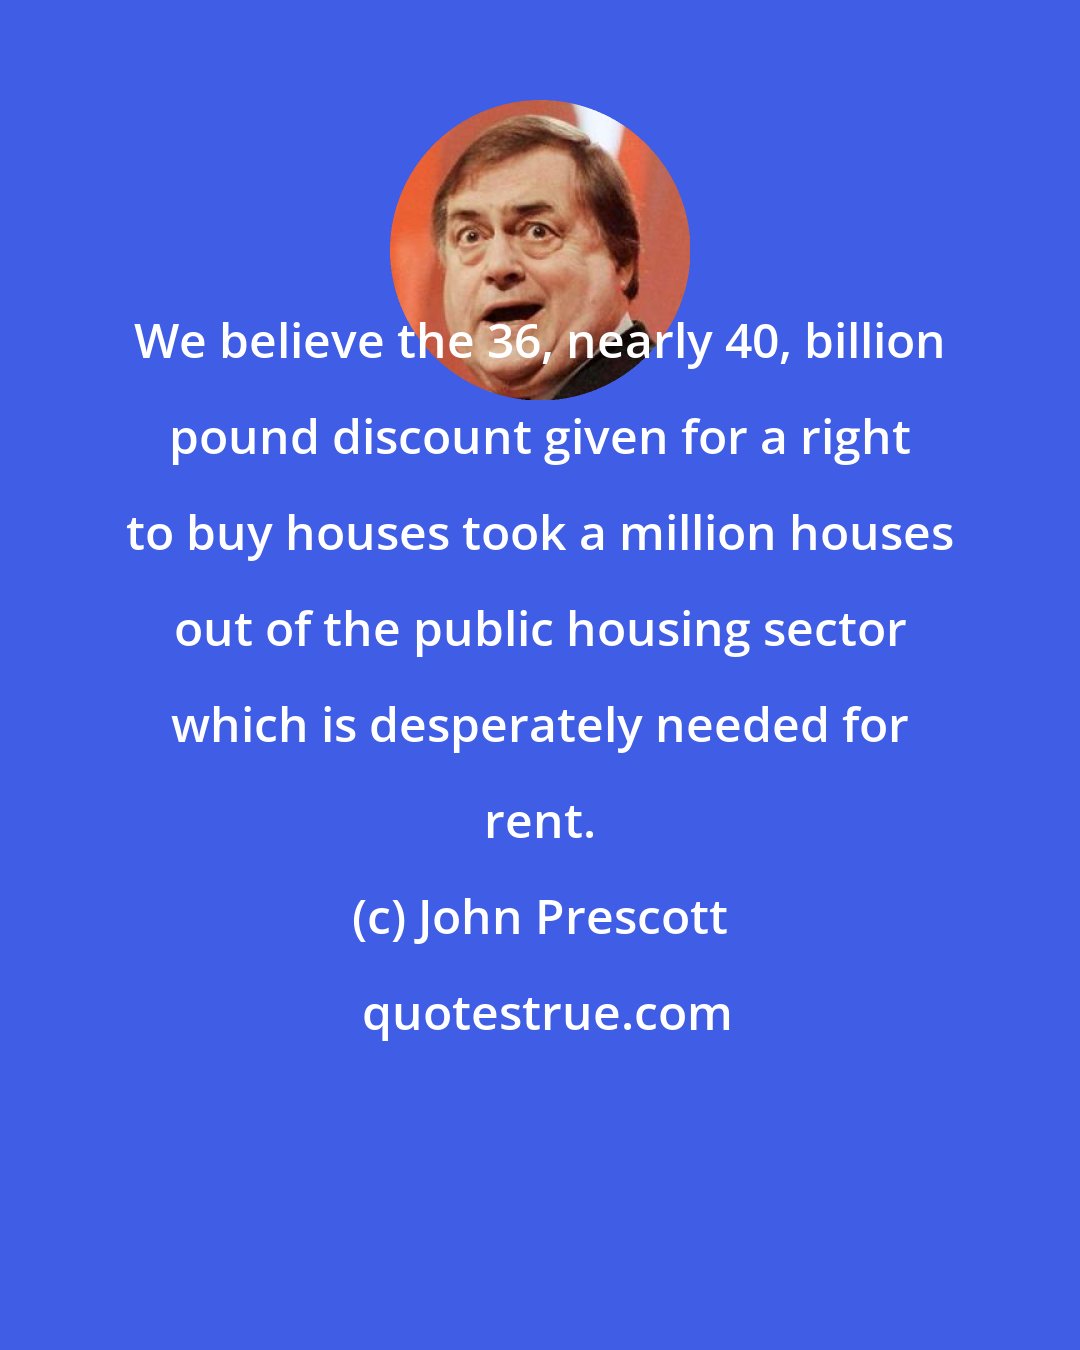 John Prescott: We believe the 36, nearly 40, billion pound discount given for a right to buy houses took a million houses out of the public housing sector which is desperately needed for rent.